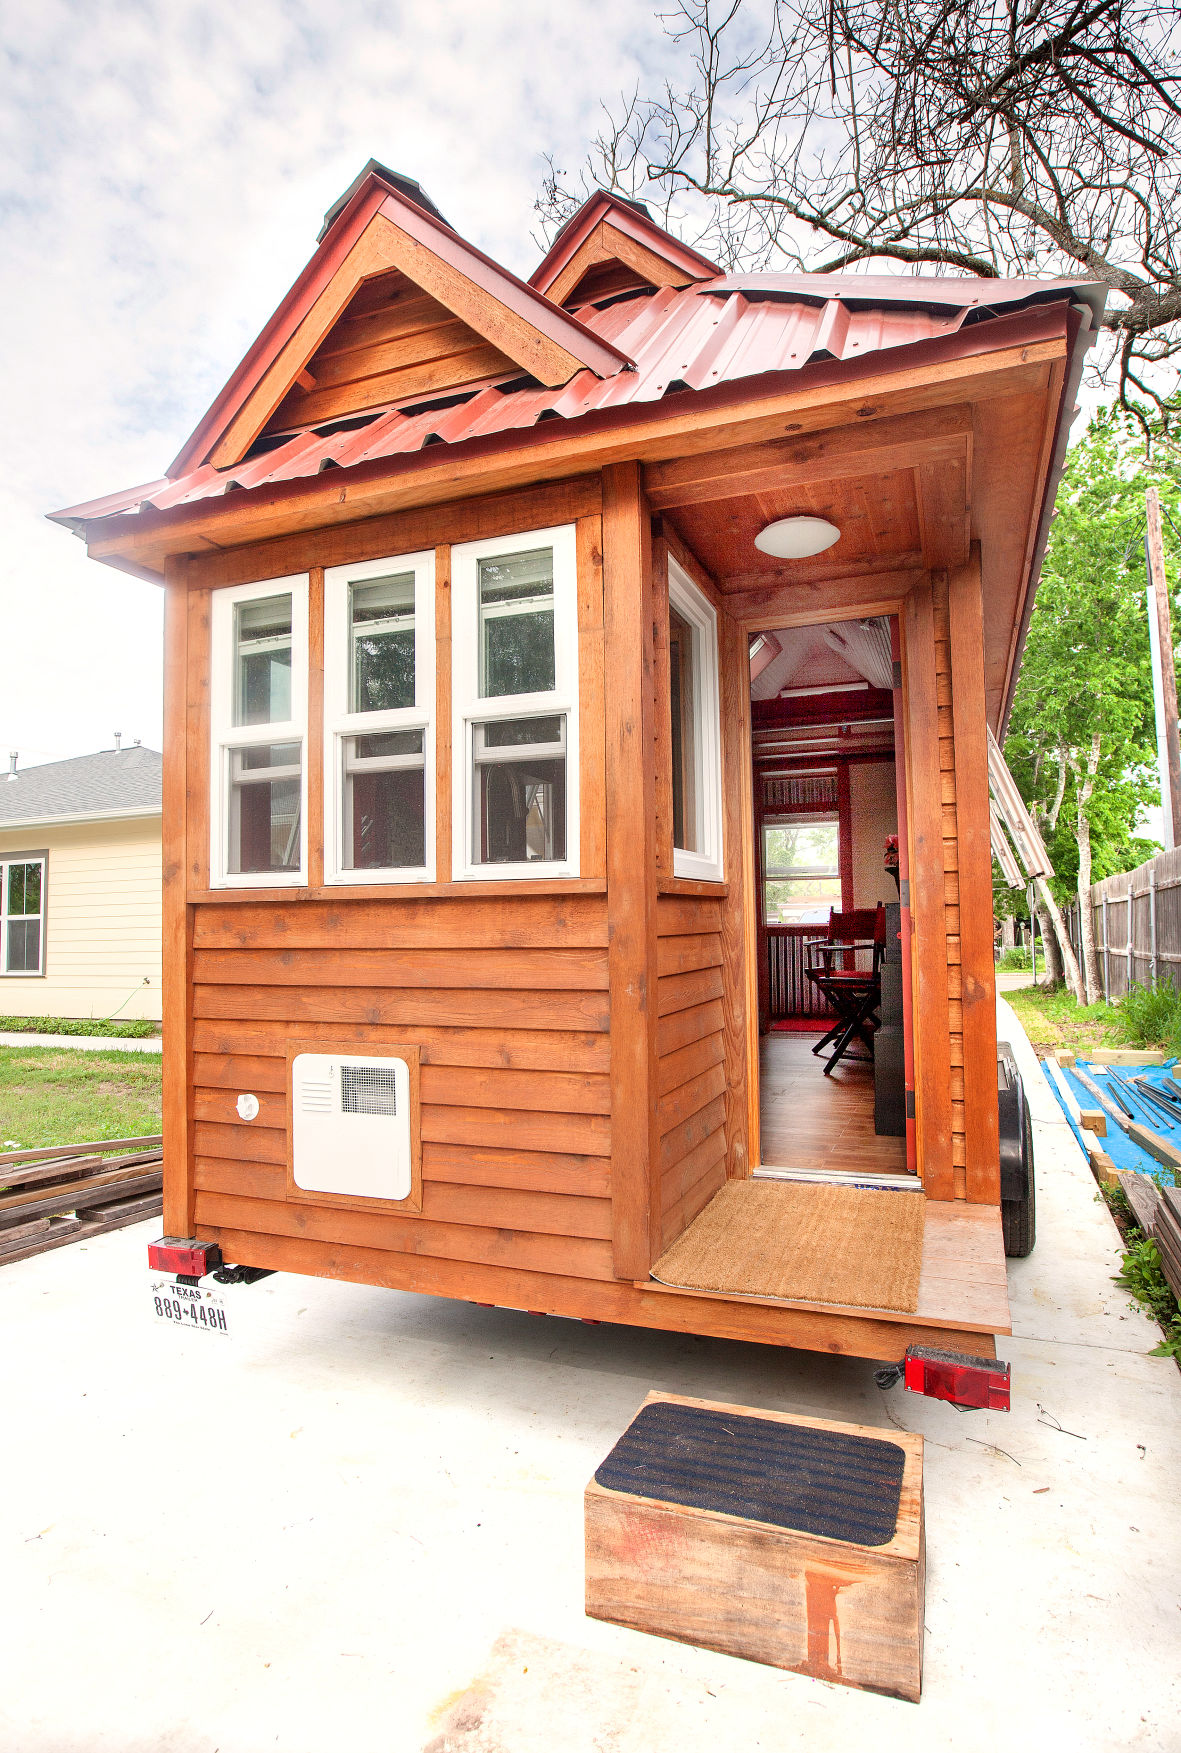 Tiny house offers different options for affordable housing ...